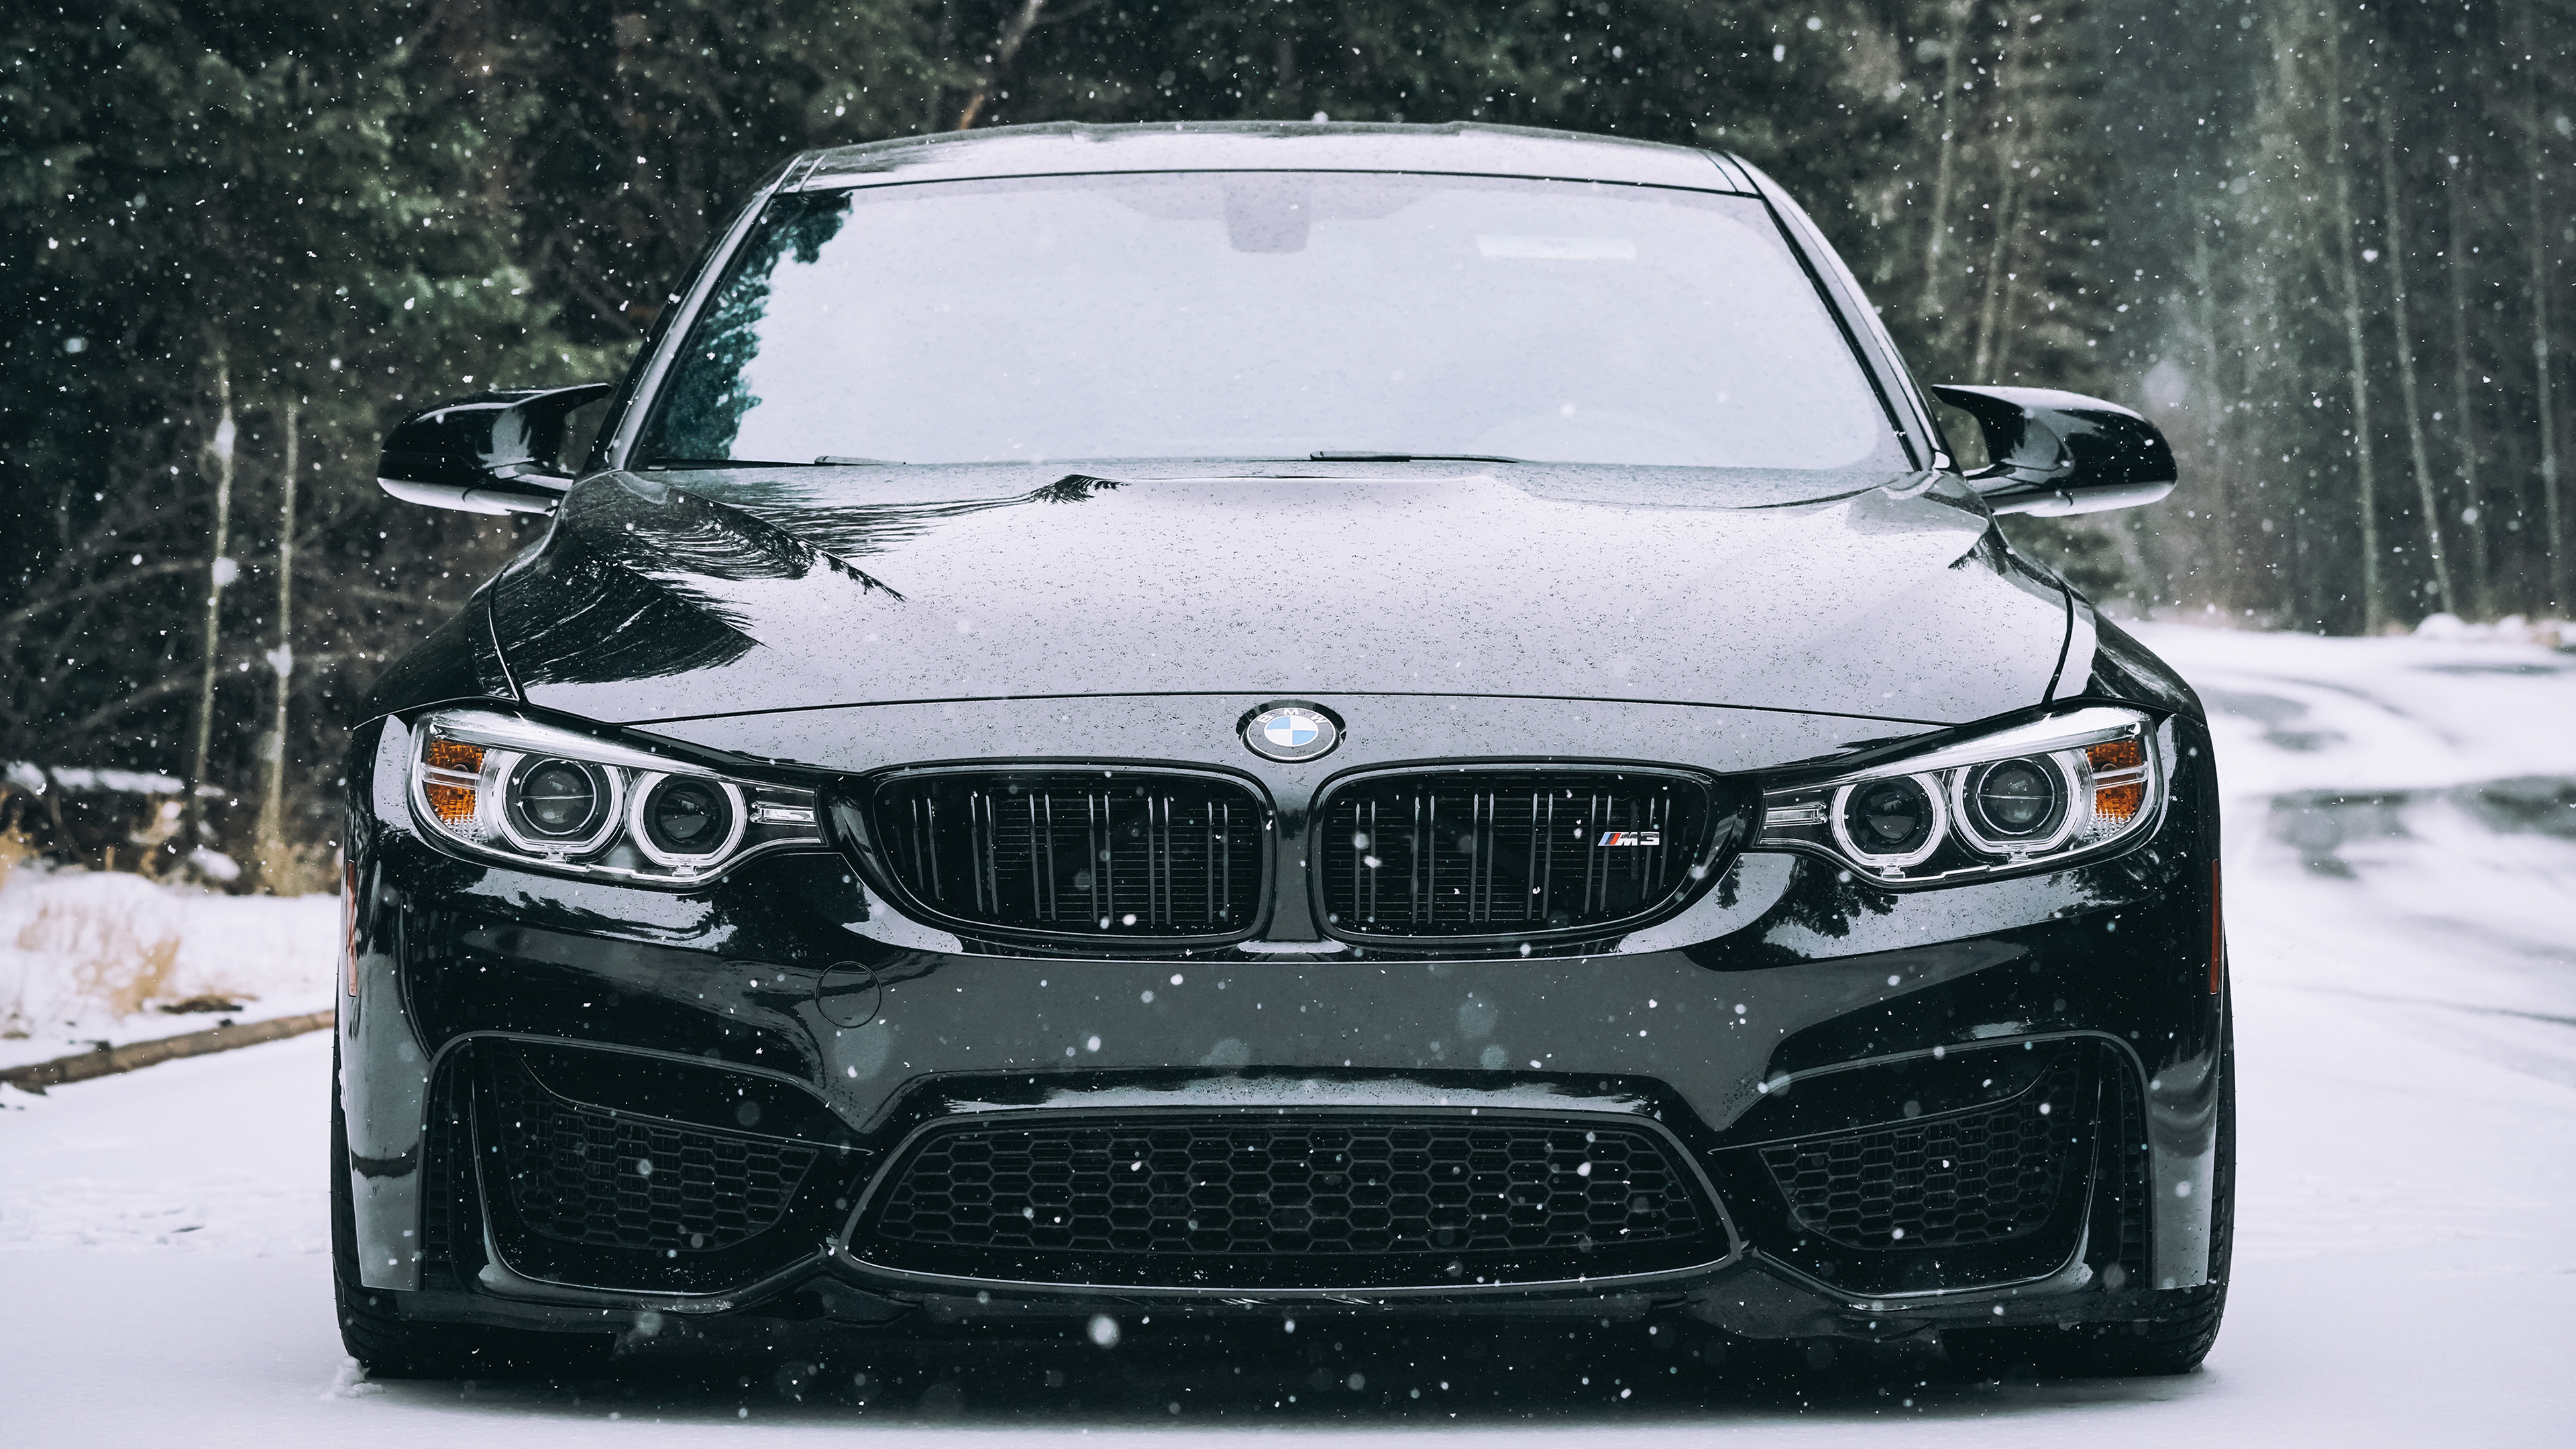 Wallpaper Cars Photo Picture Bmw F80 Winter Snow Front